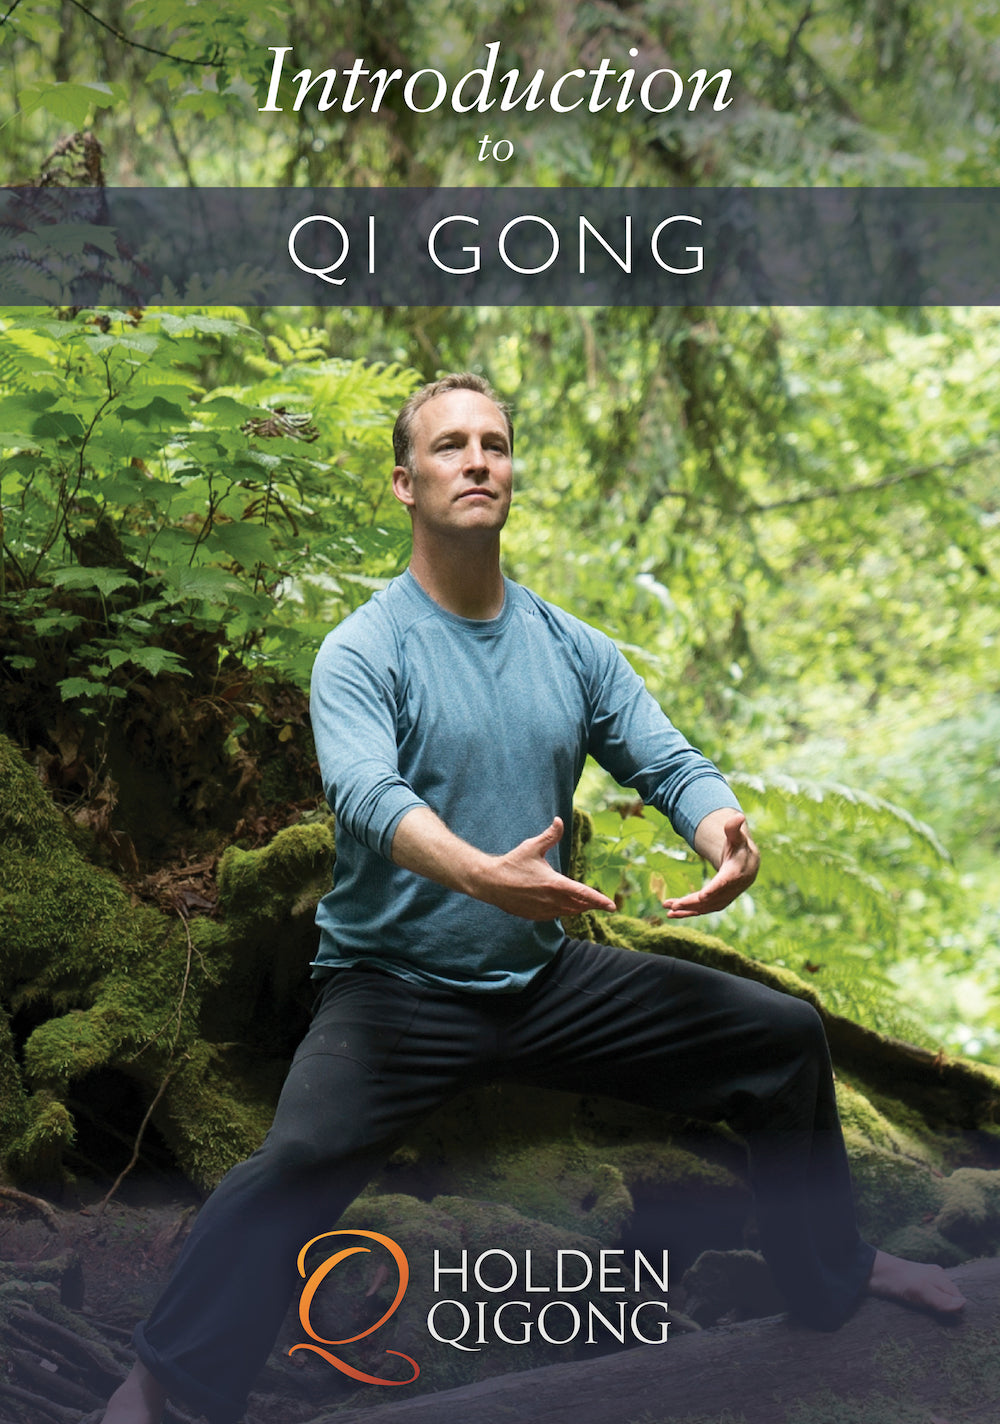 Introduction to Qi Gong DVD with Lee Holden - Budovideos Inc